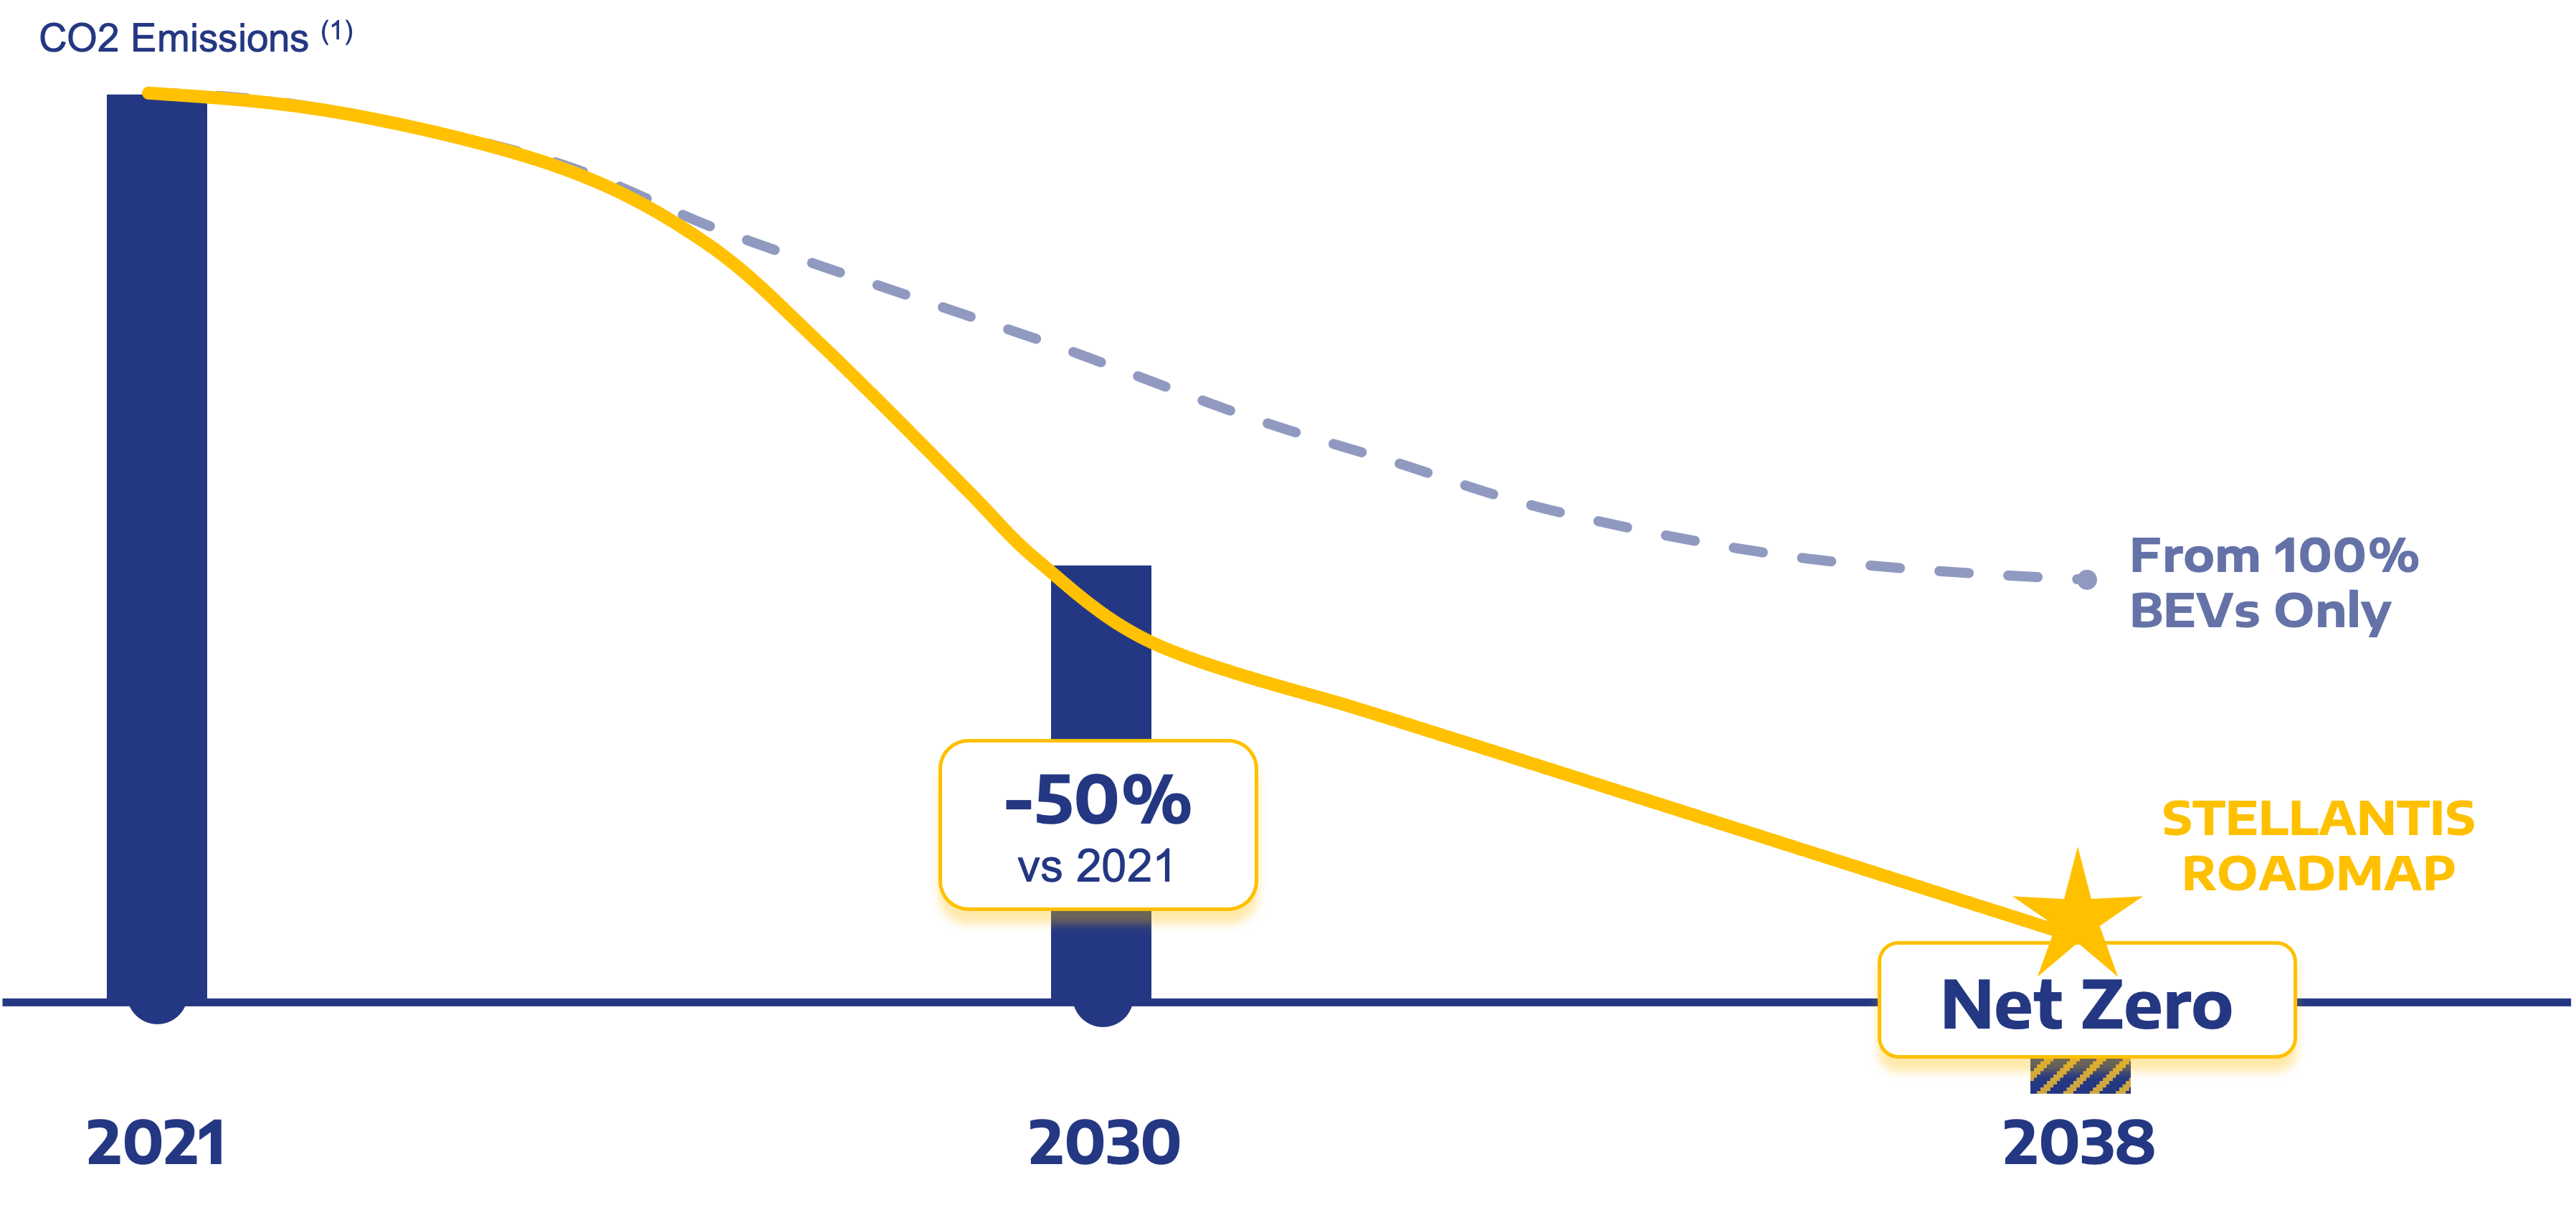 Graph of Stellantis target to reduce co2 emissions by 50 percent from 2021 to 2030 reaching carbon net zero by 2038